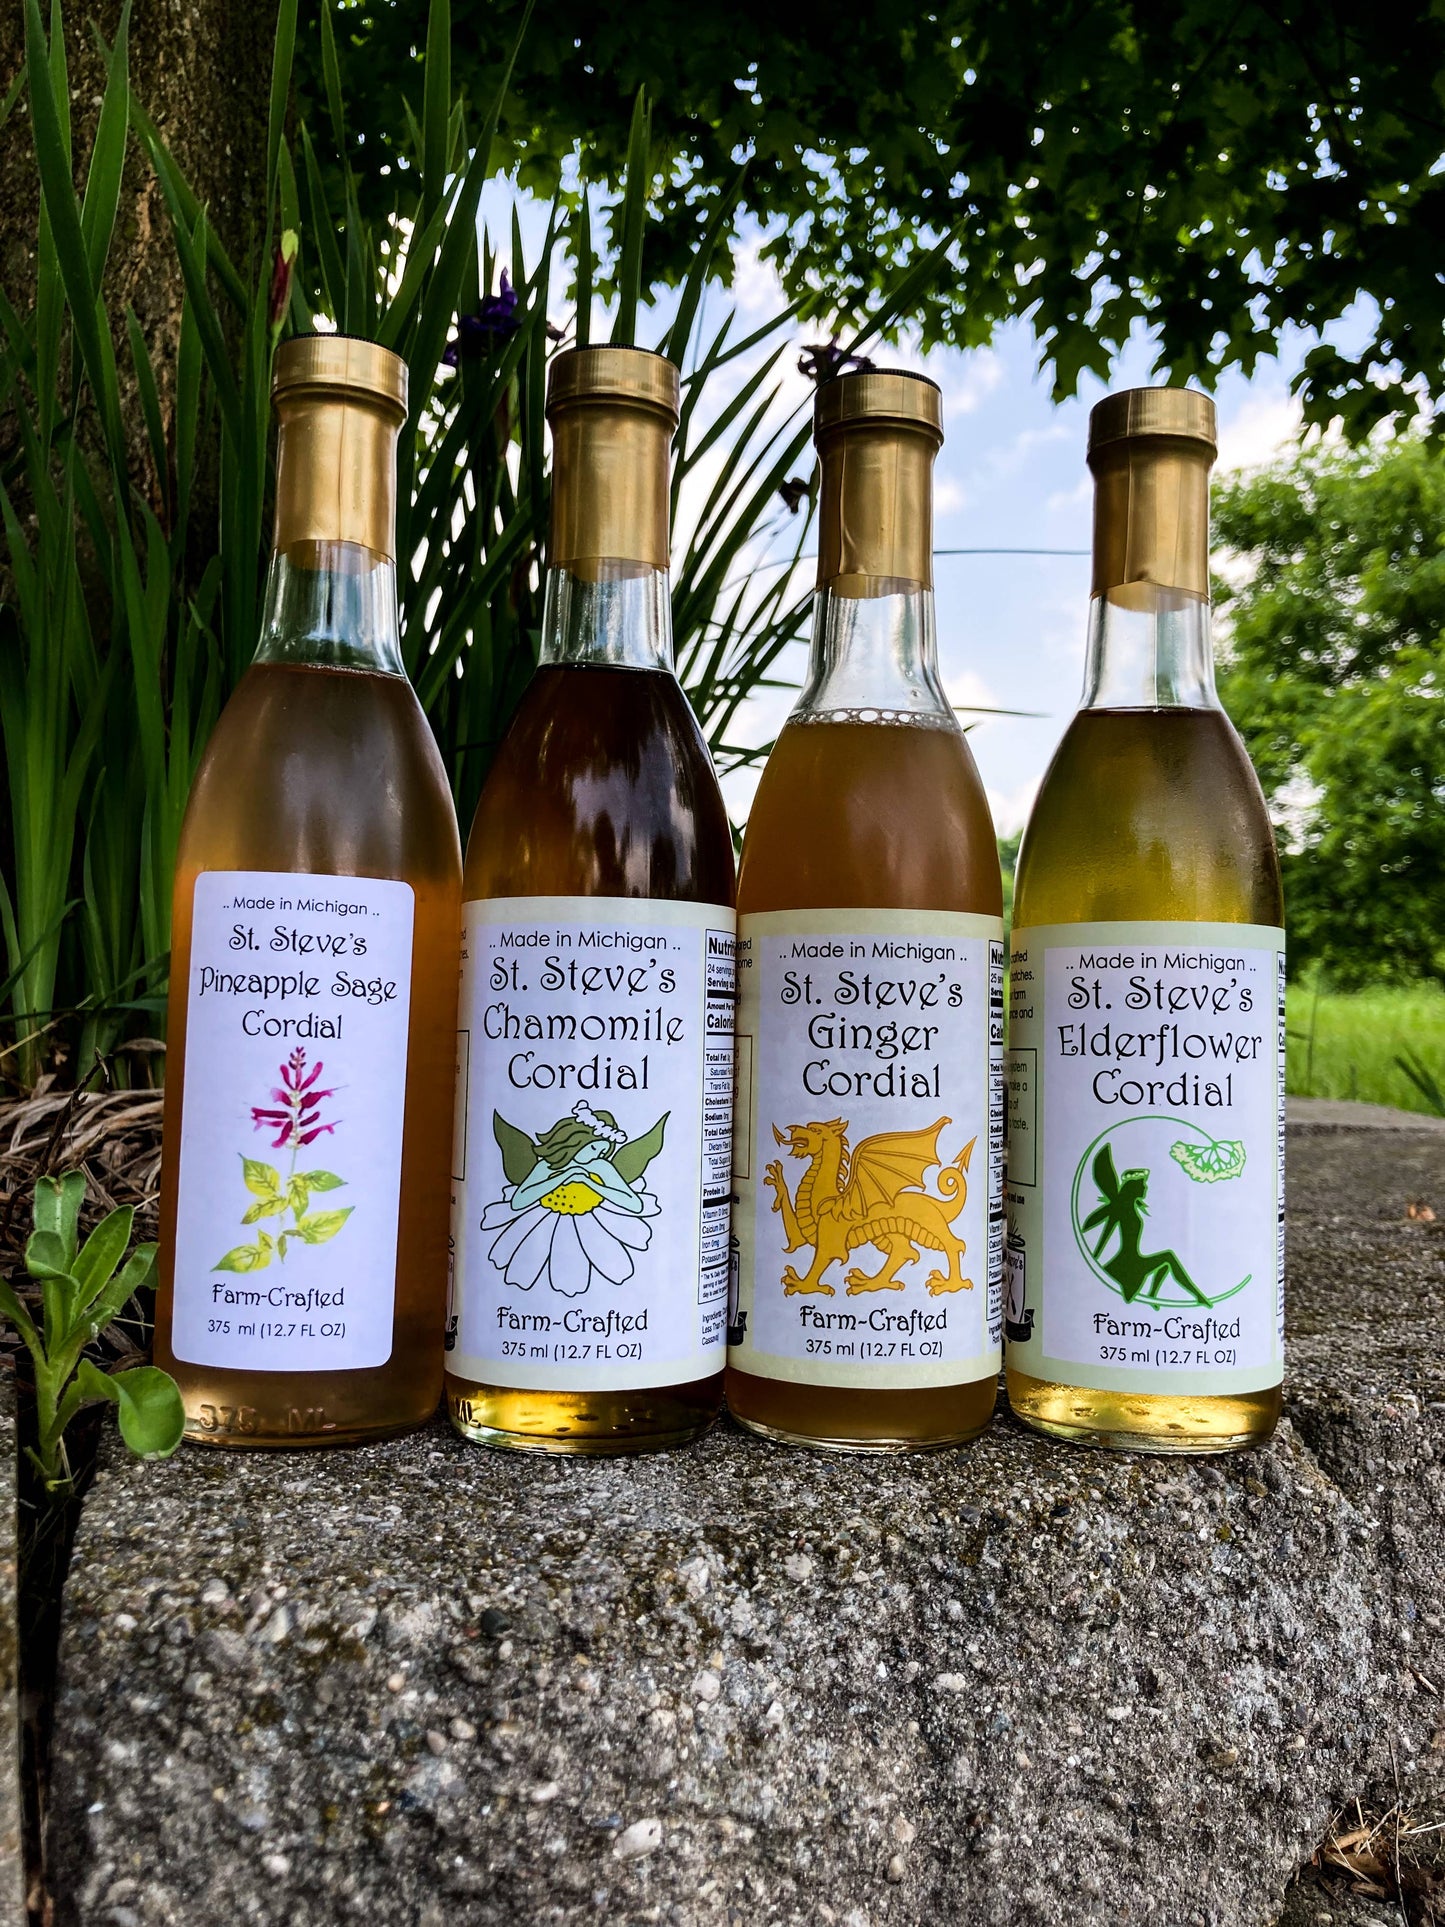 Farm-Crafted Natural Flavor Syrups by St. Steve's